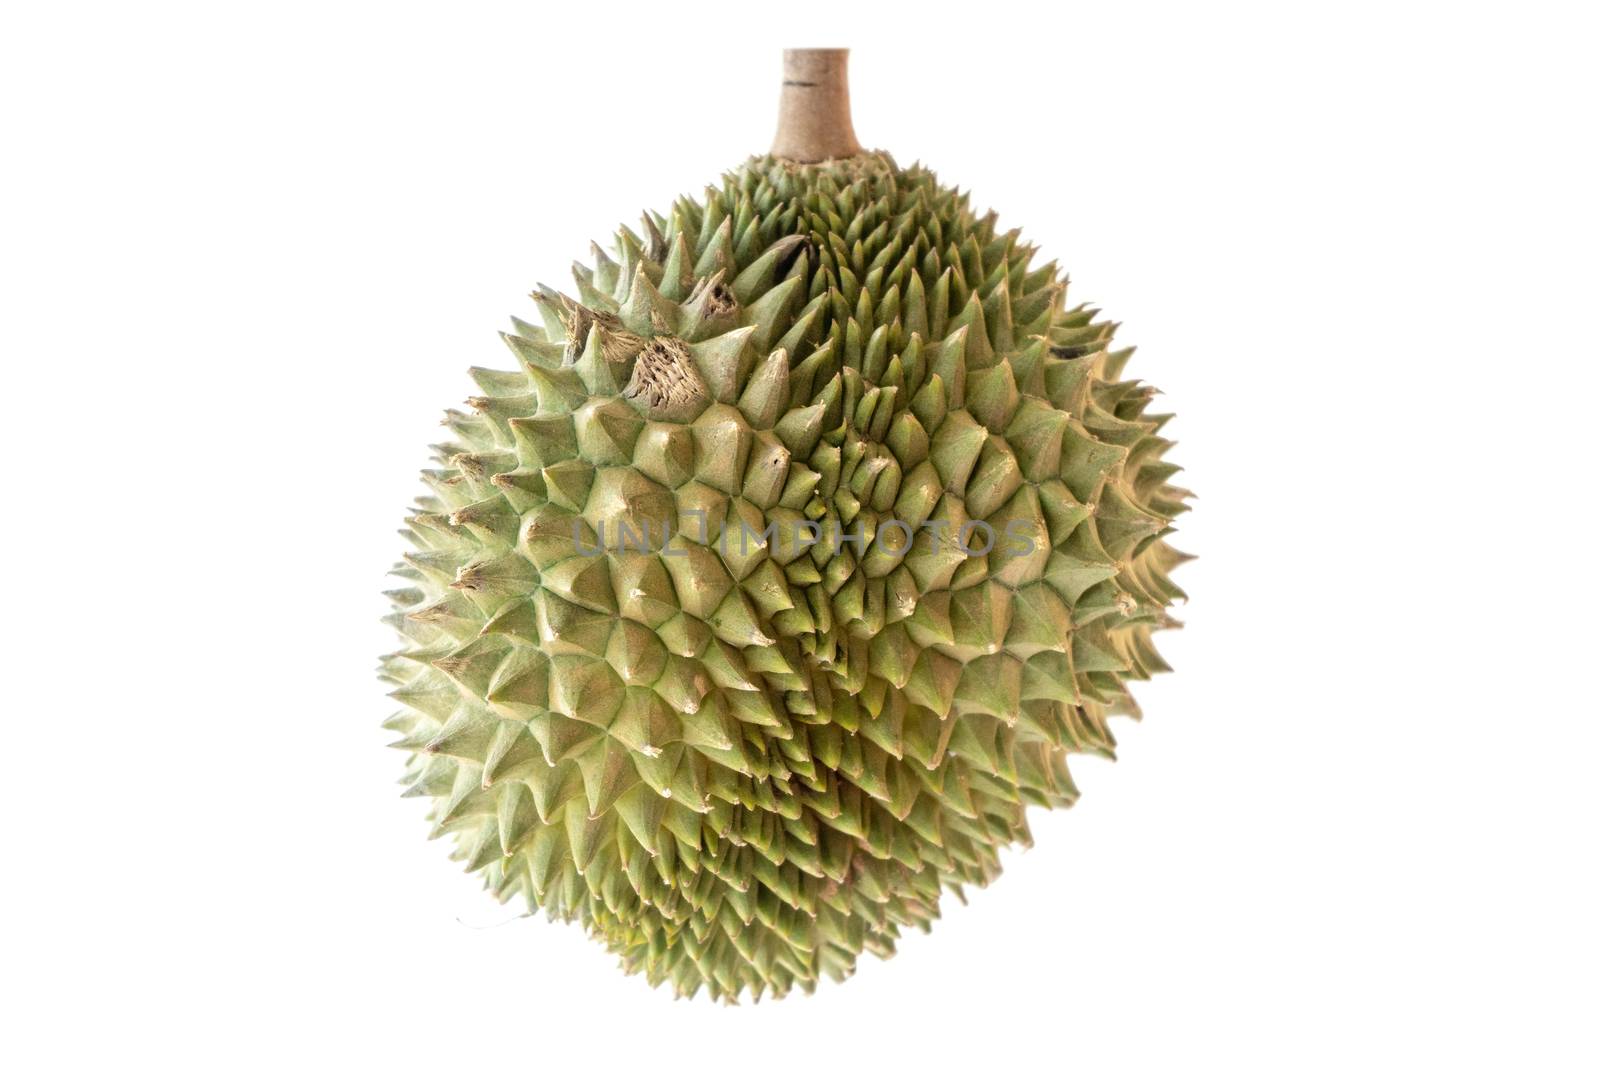 Malaysia famous king of fruits durian Musang King isolated on white background.